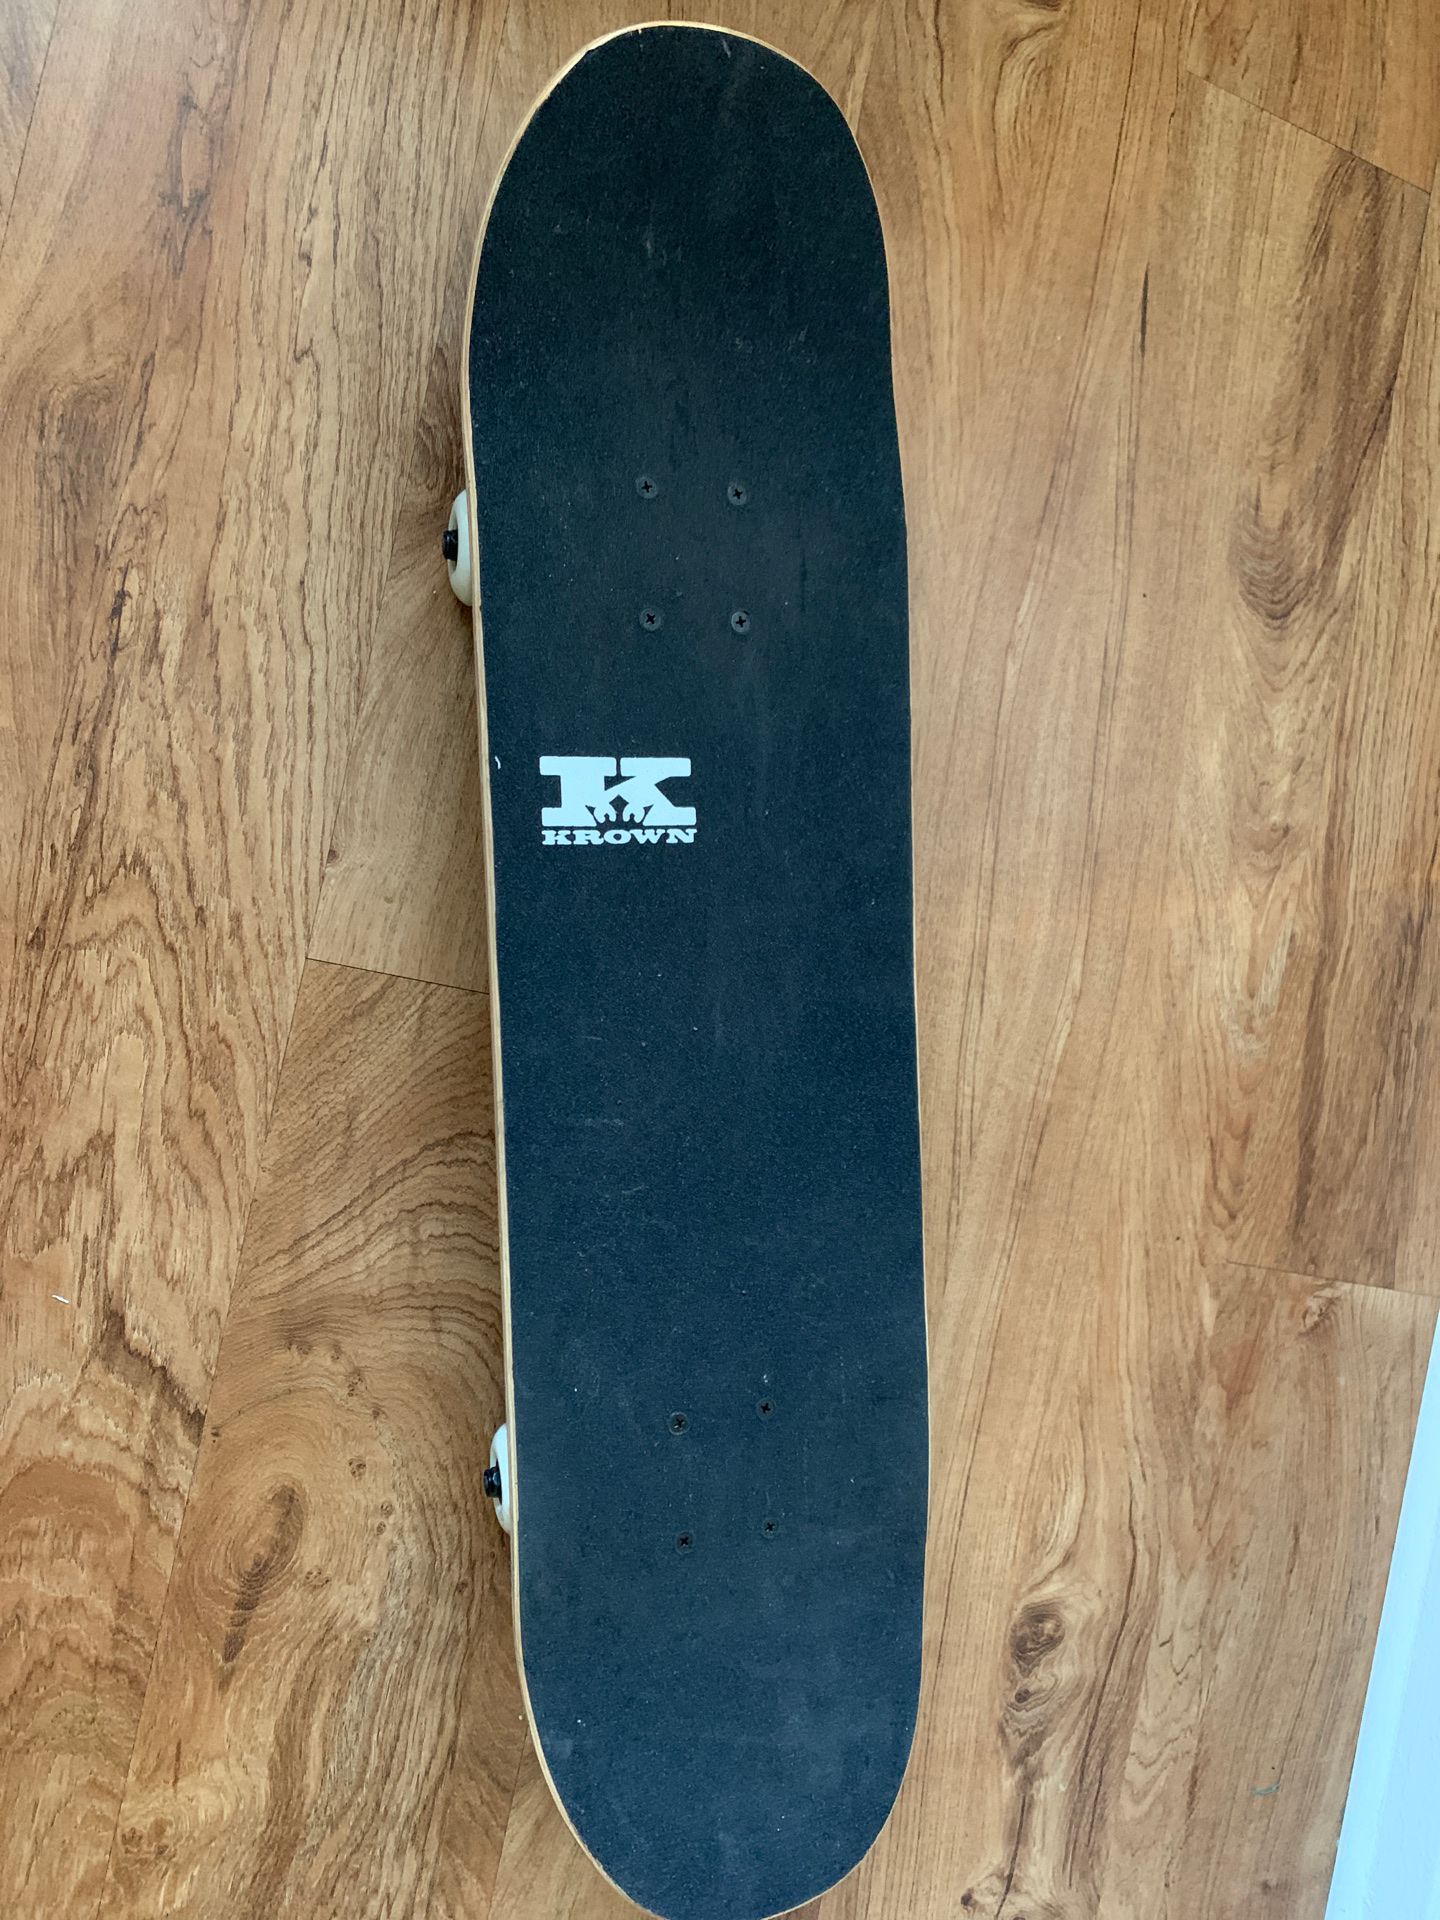 Skateboard only used twice